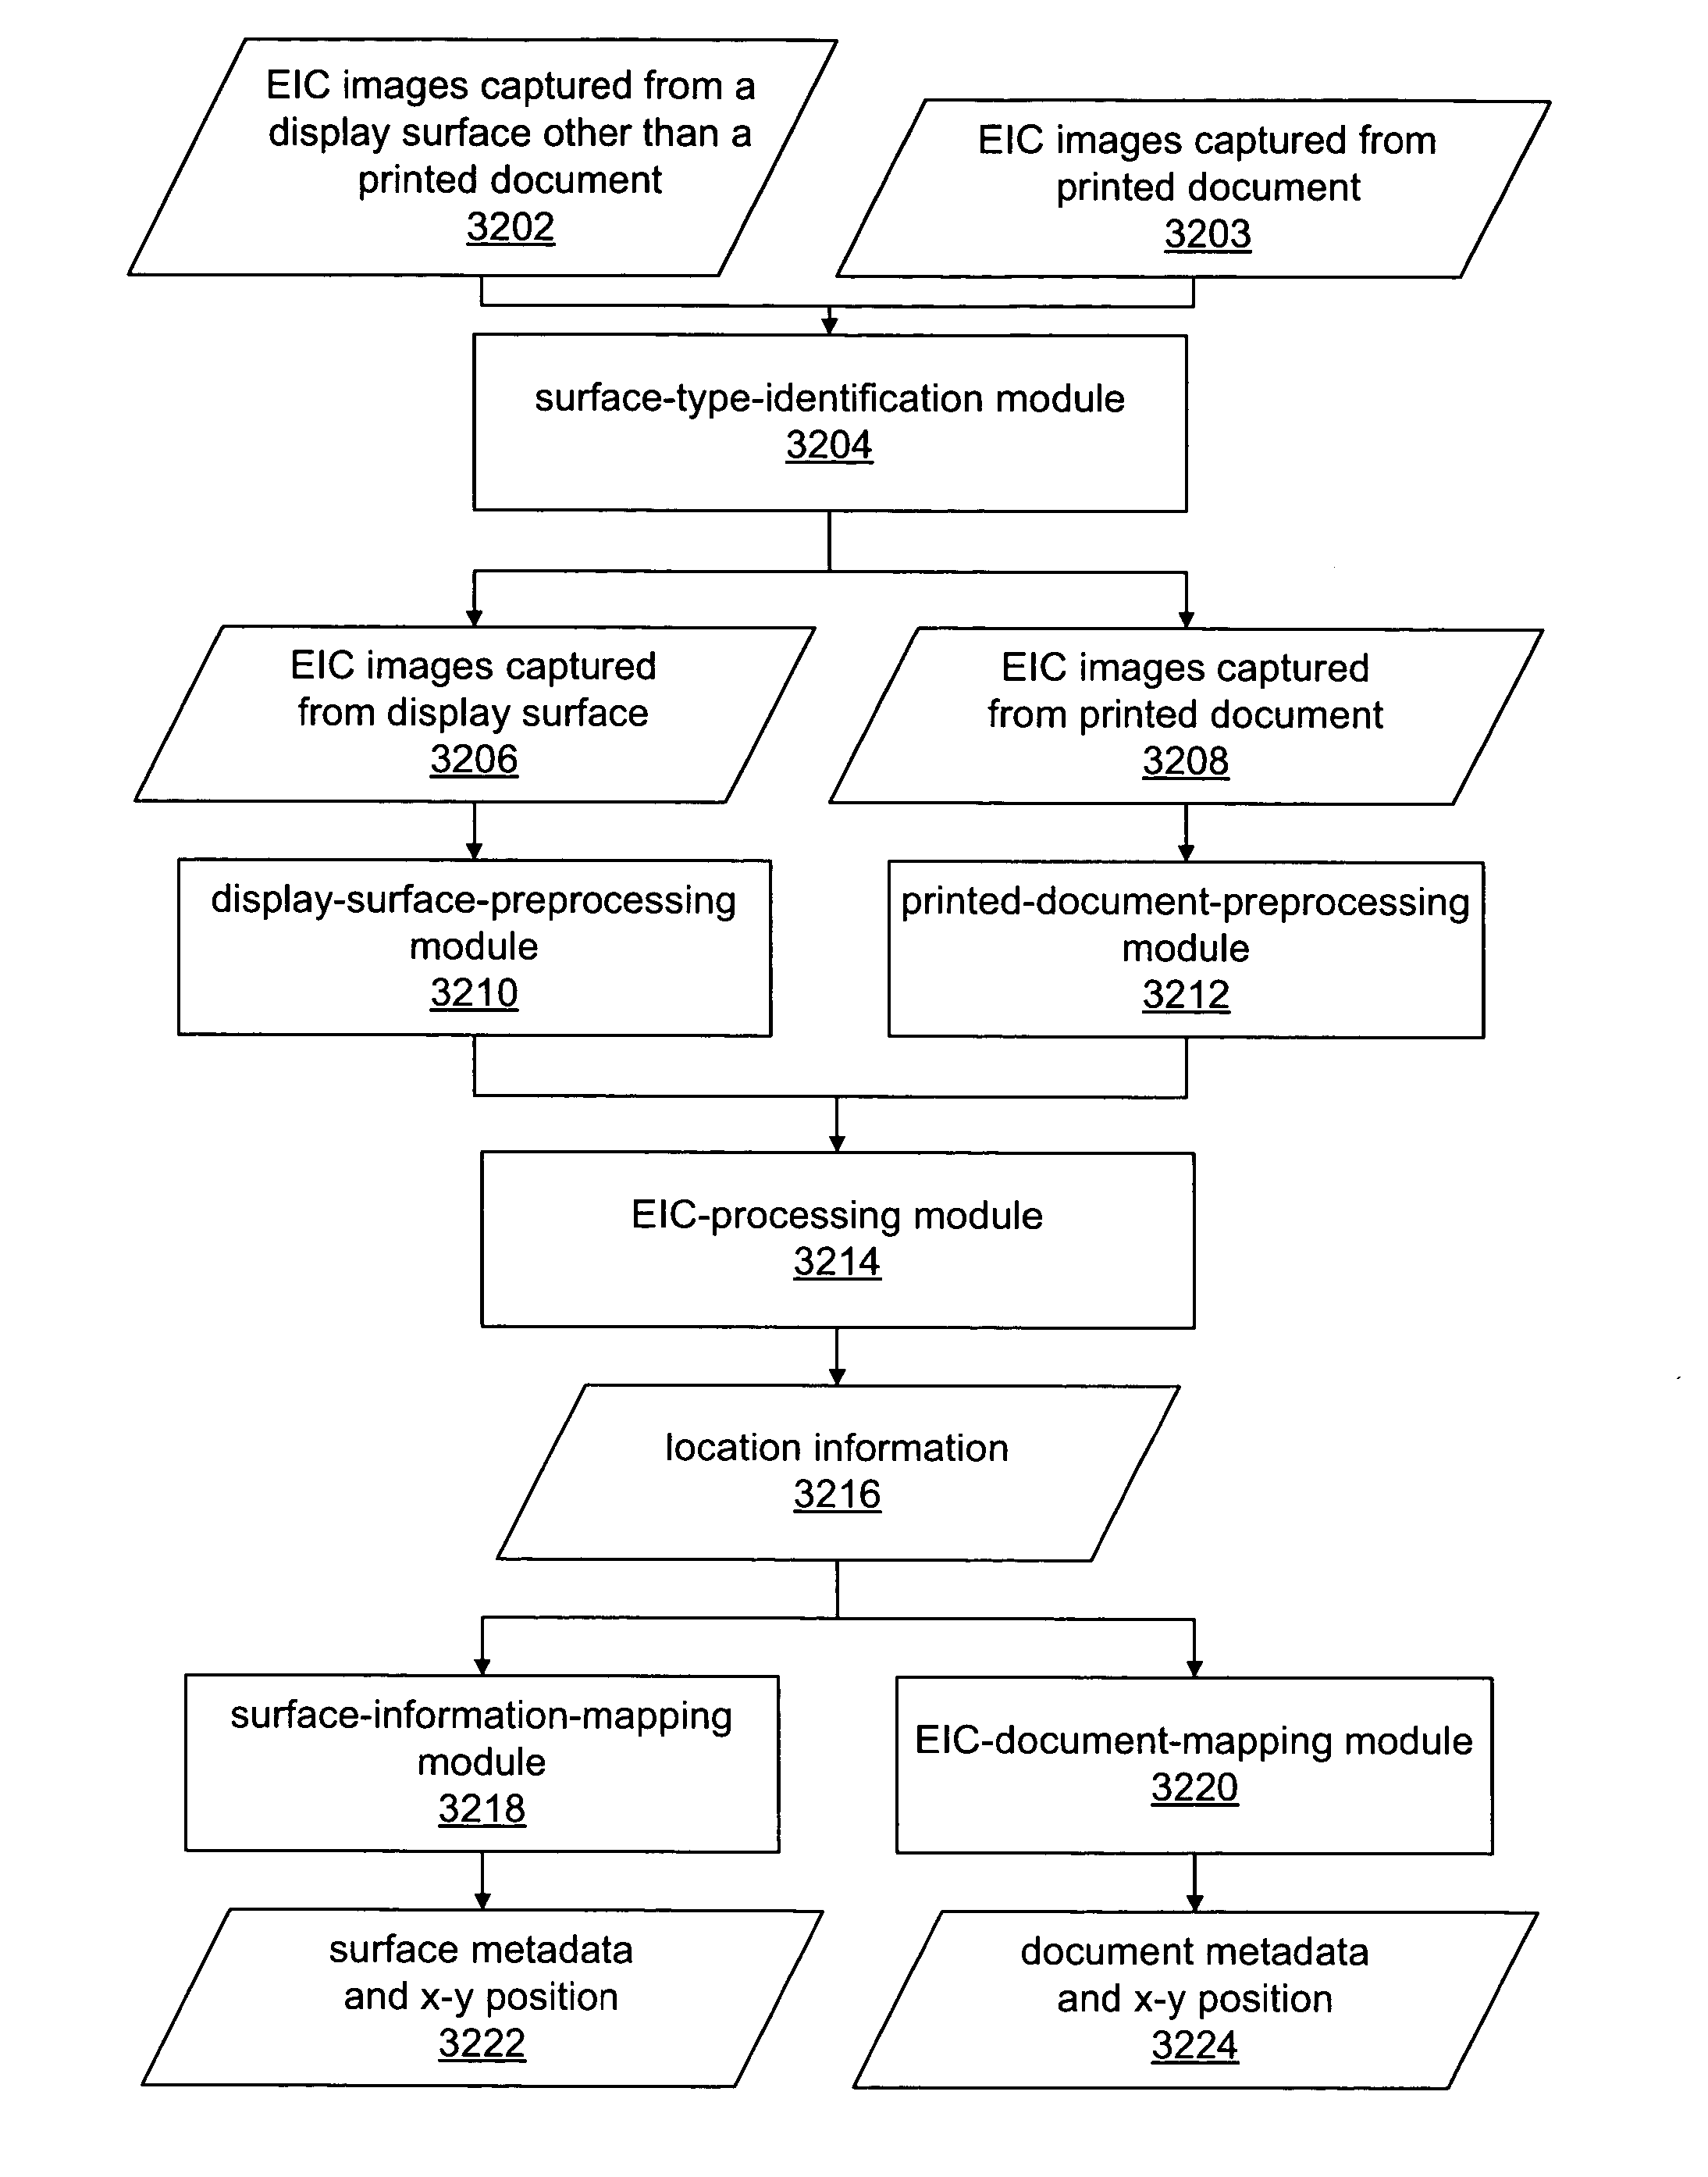 Embedded interaction code enabled surface type identification